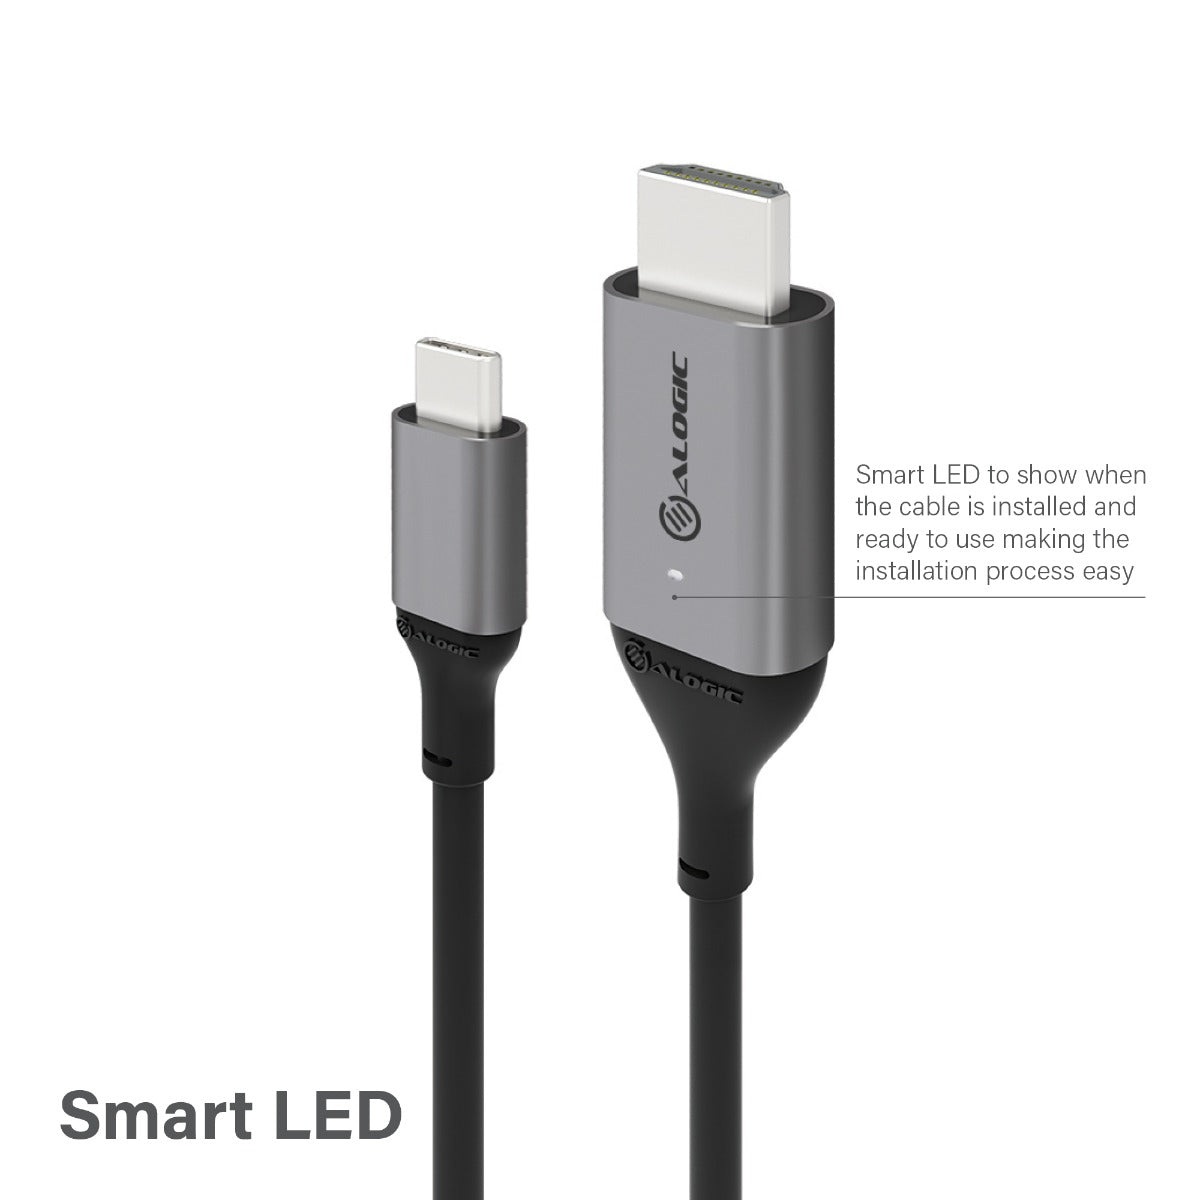 USB-C (Male) to HDMI (Male) Cable - Ultra Series - 4K 60Hz -Space Grey